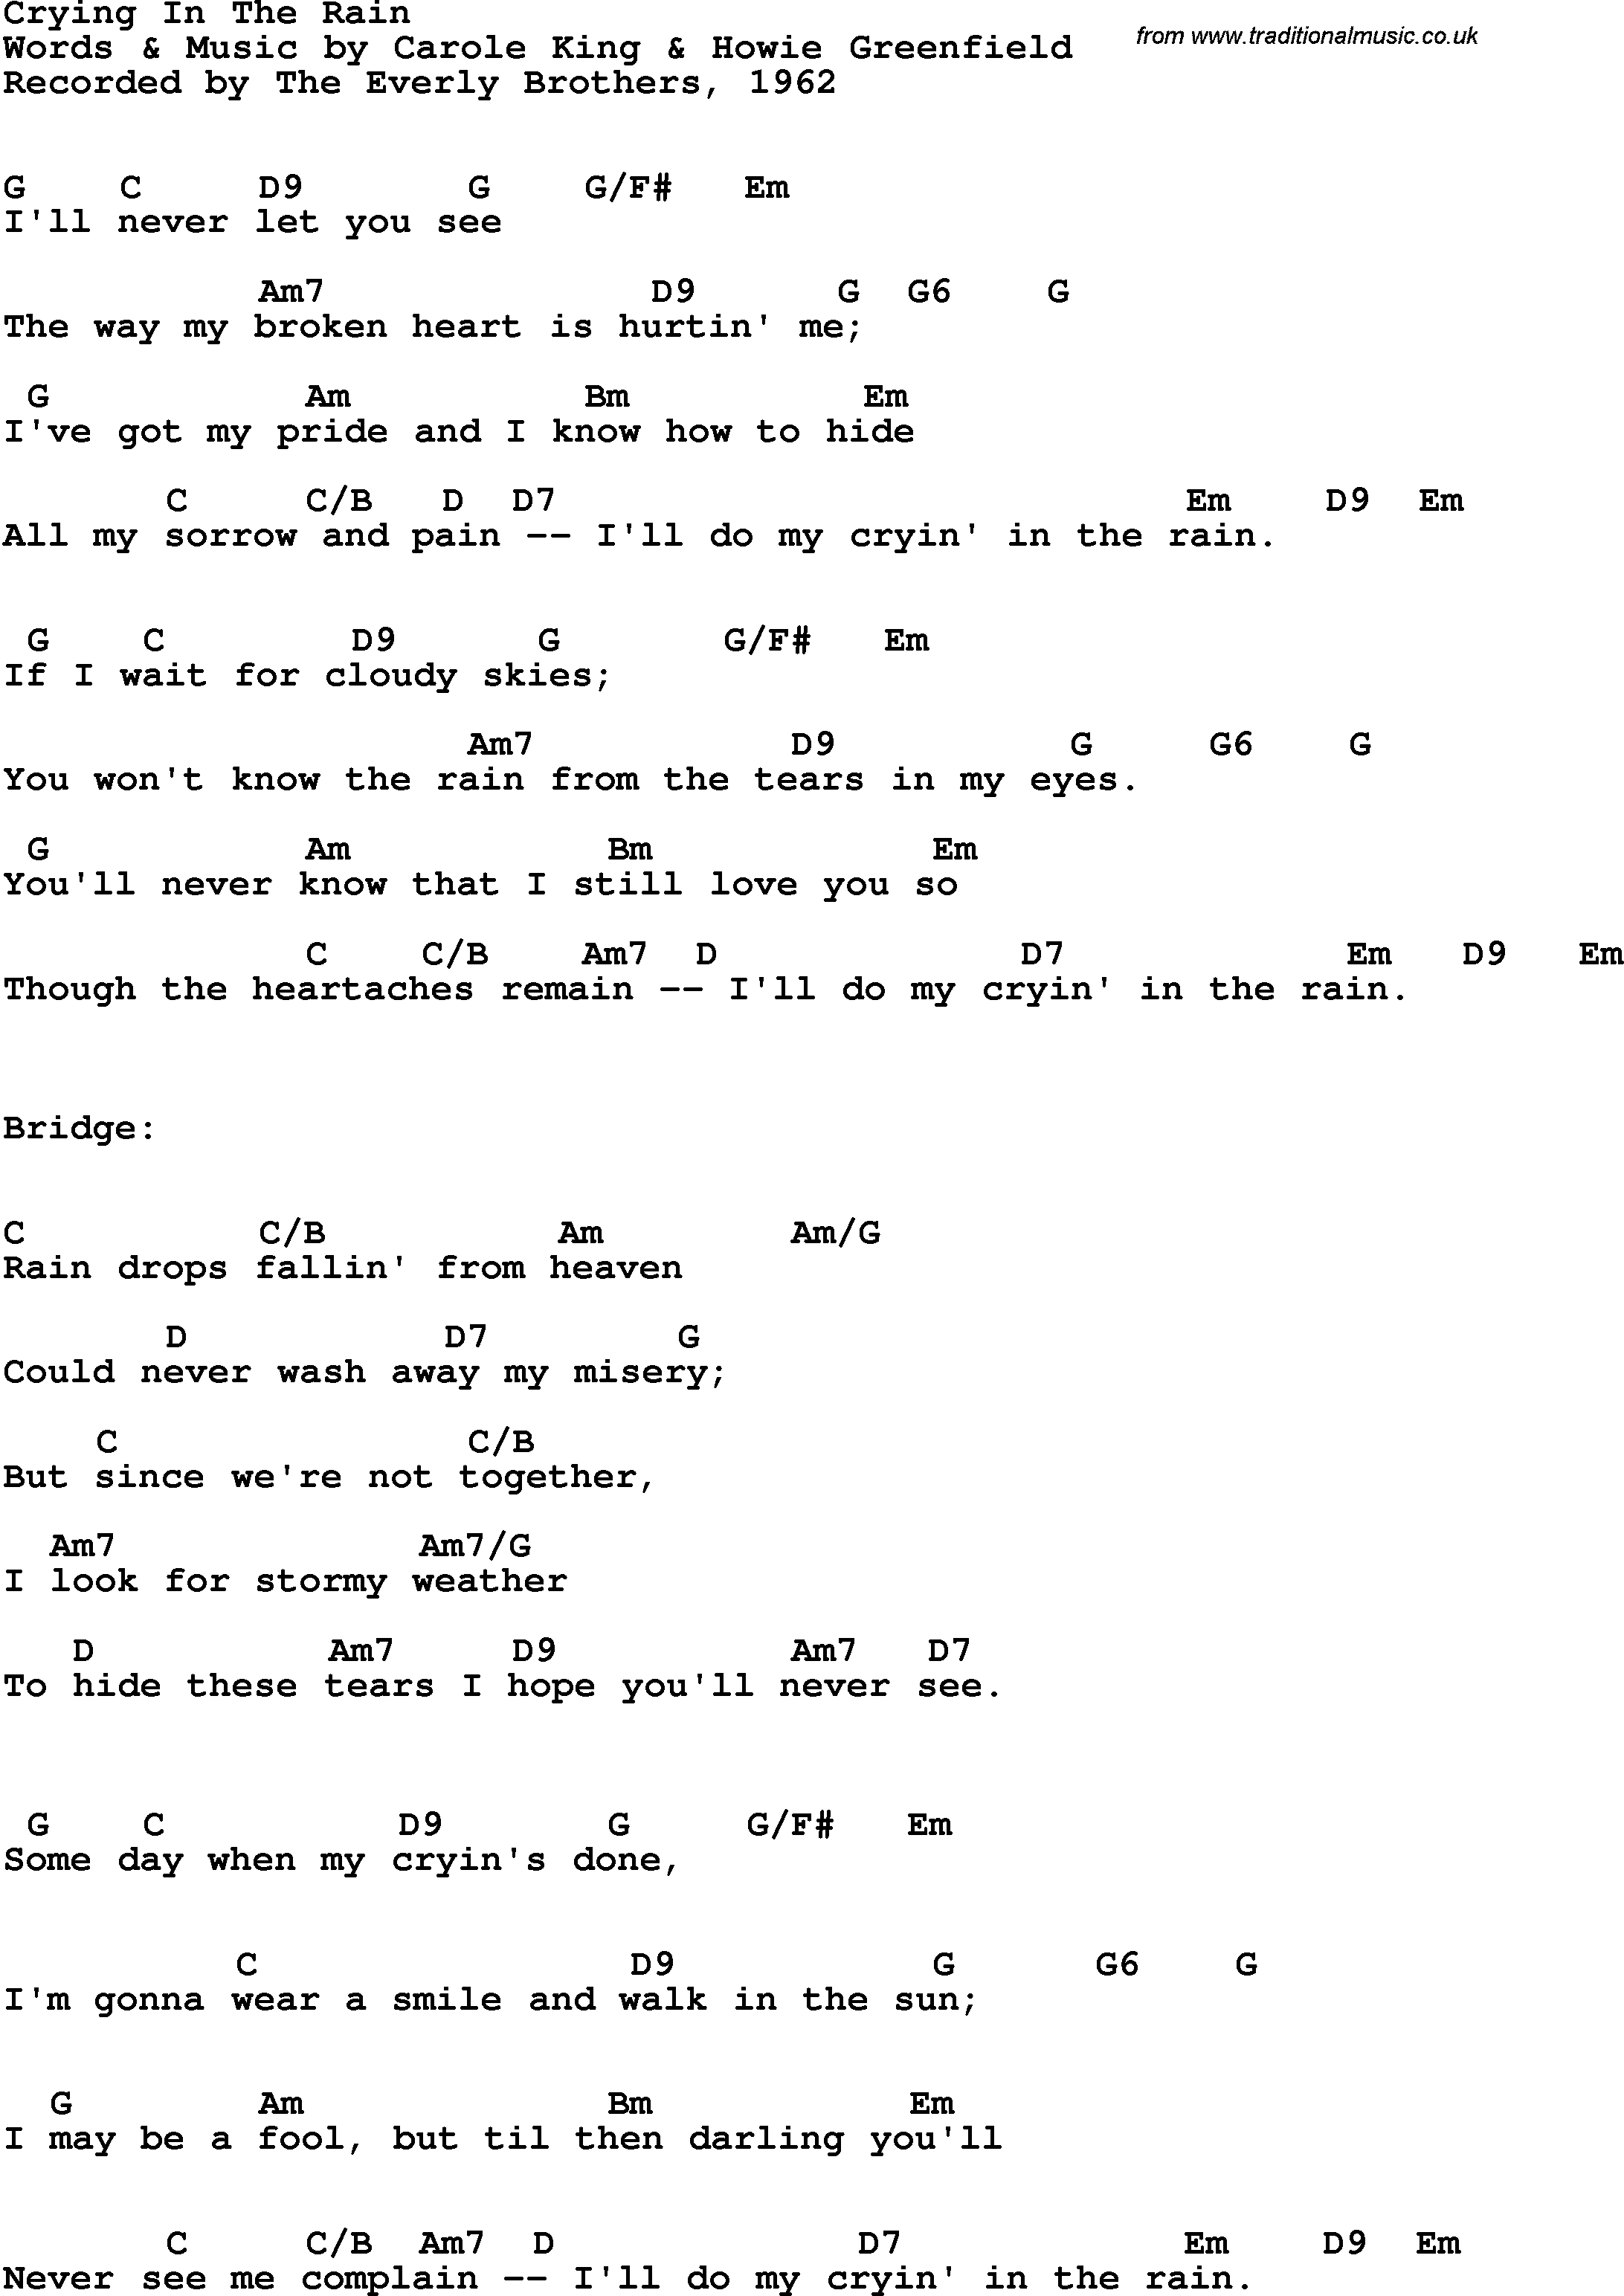 Song Lyrics with guitar chords for Crying In The Rain - The Everly Brothers, 1962